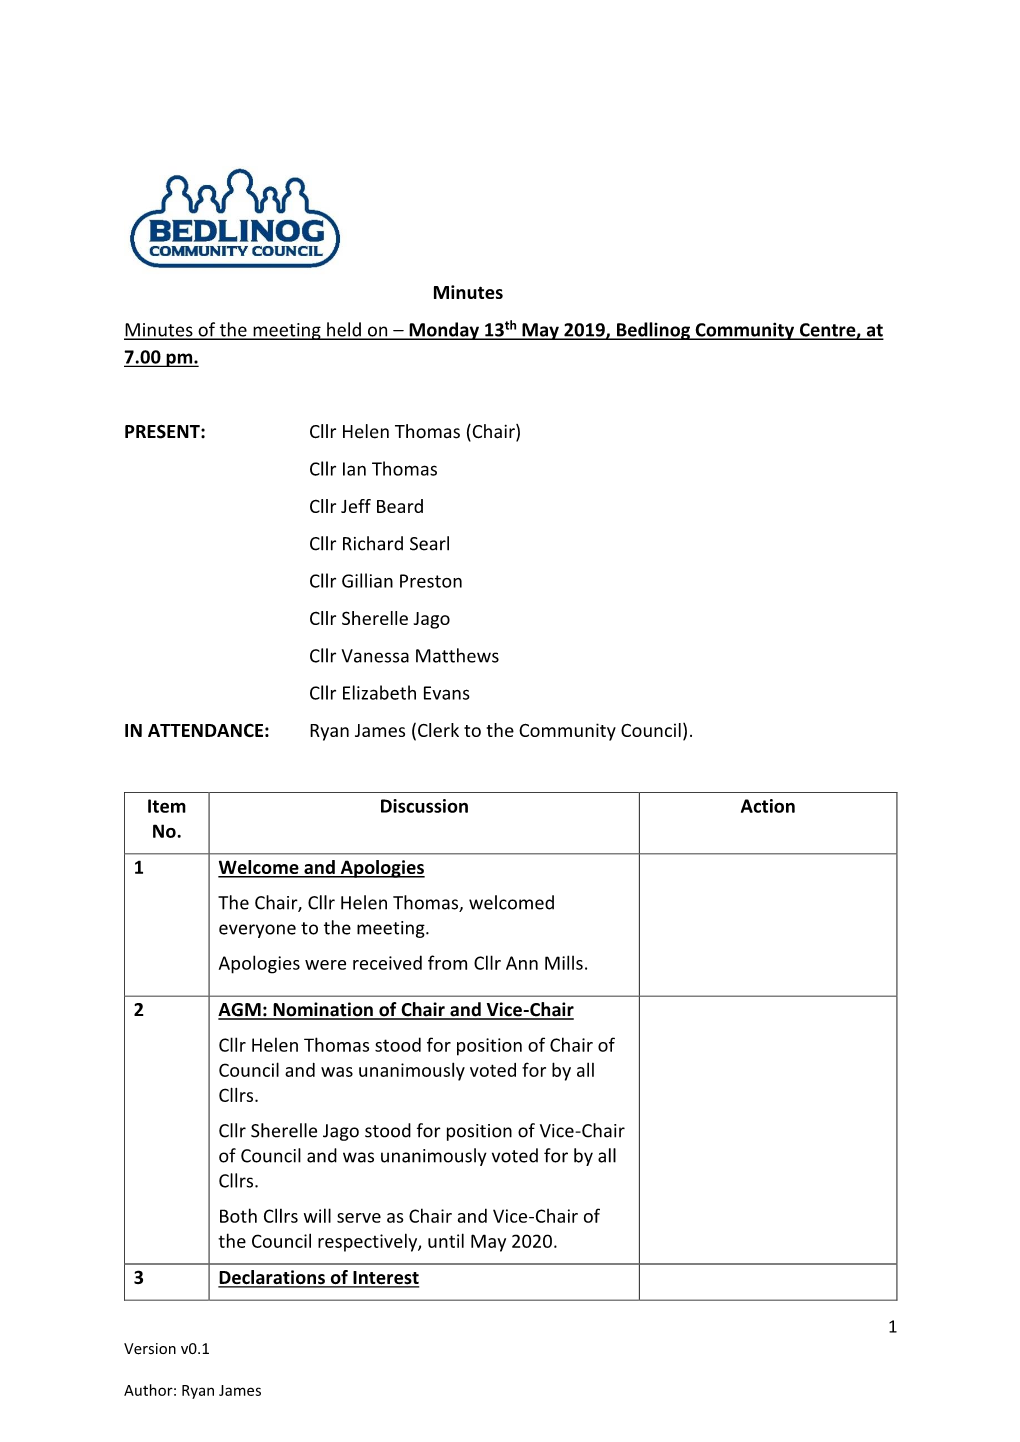 Minutes Minutes of the Meeting Held on – Monday 13Th May 2019, Bedlinog Community Centre, at 7.00 Pm